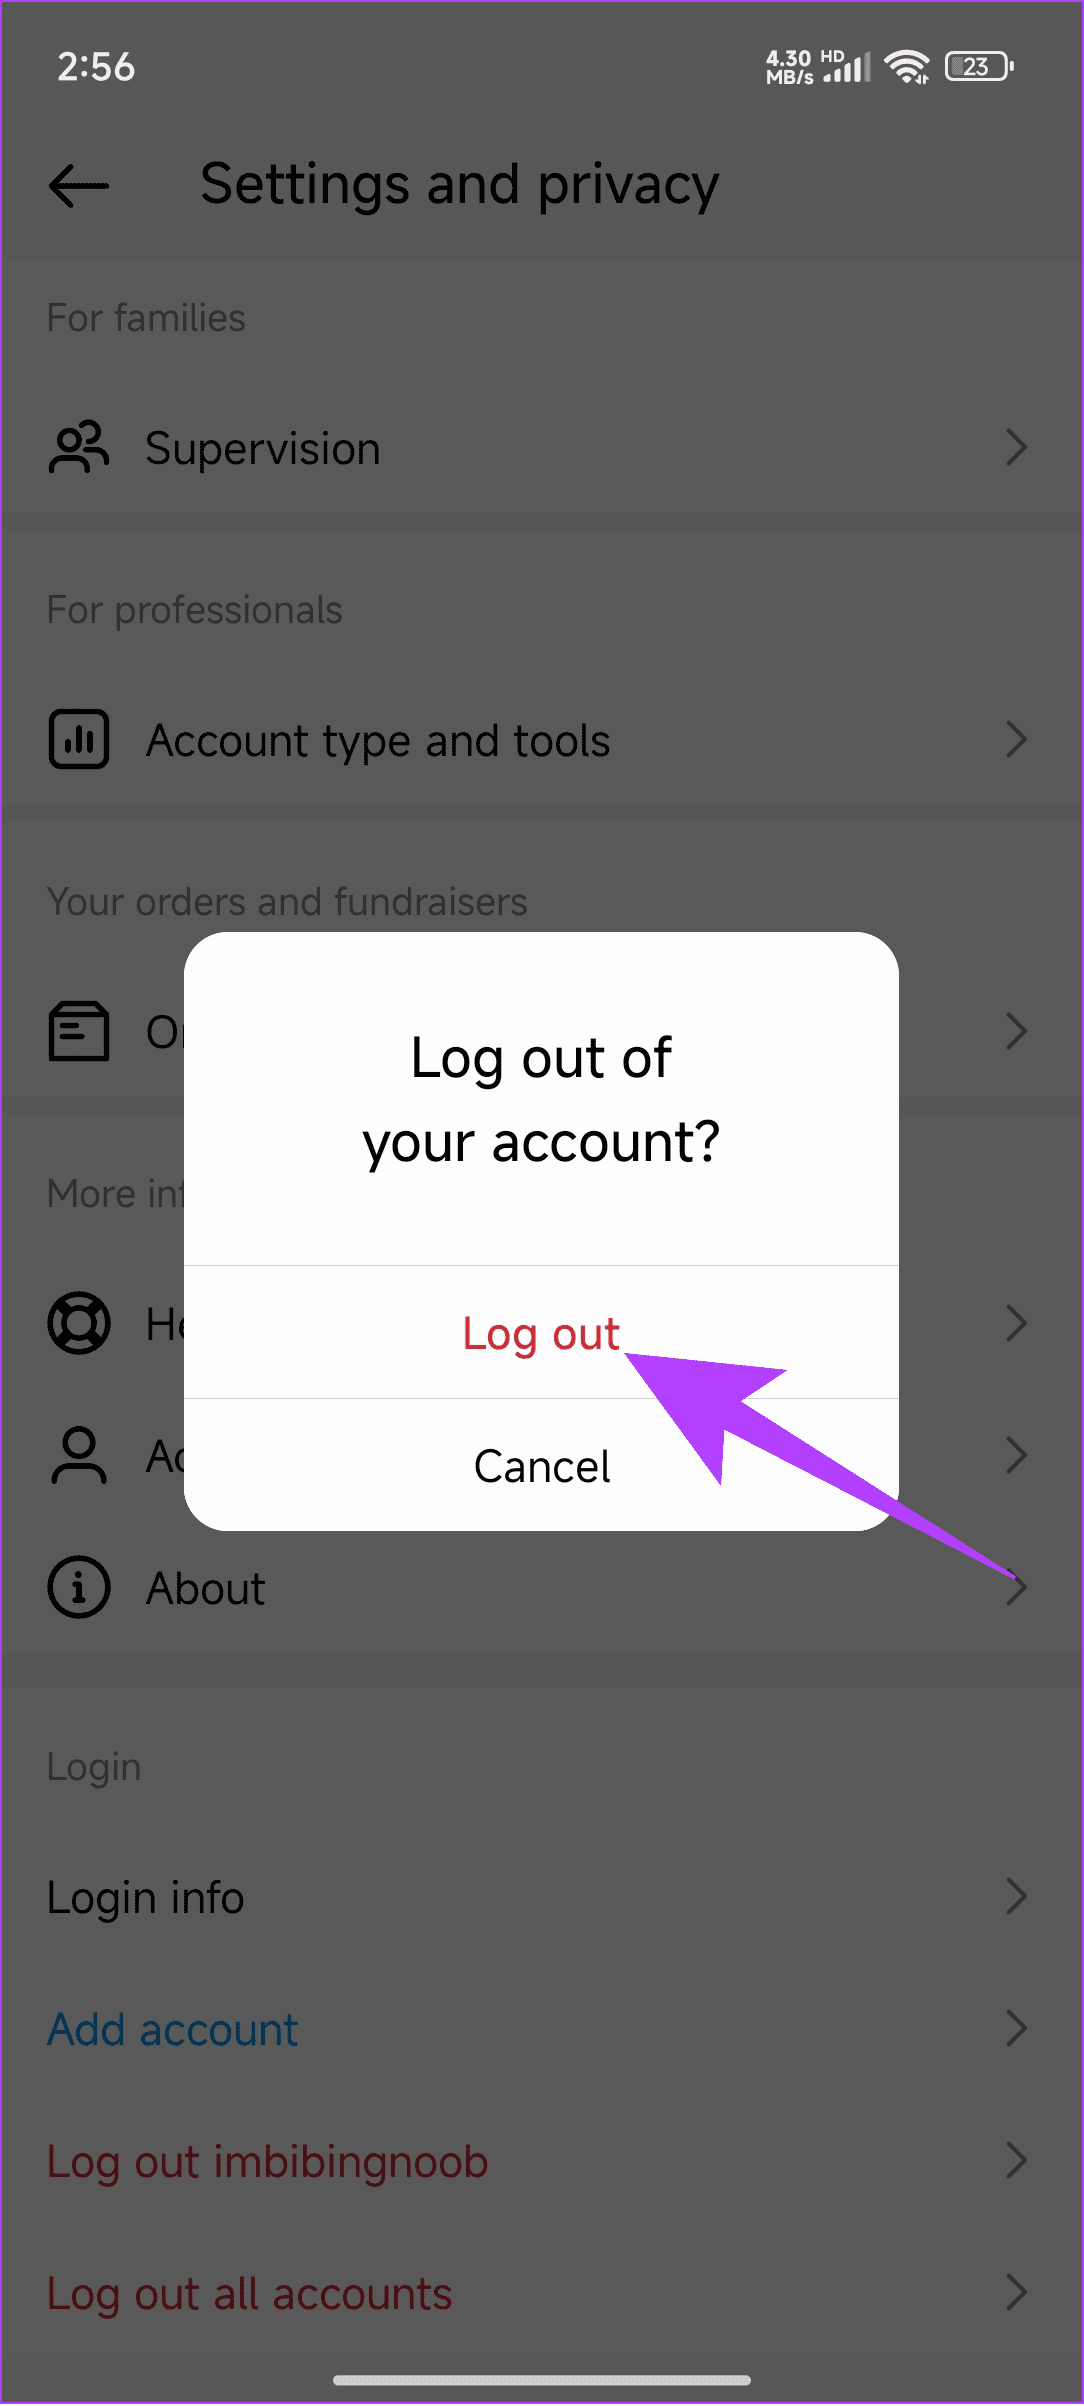 Choose Log out to confirm